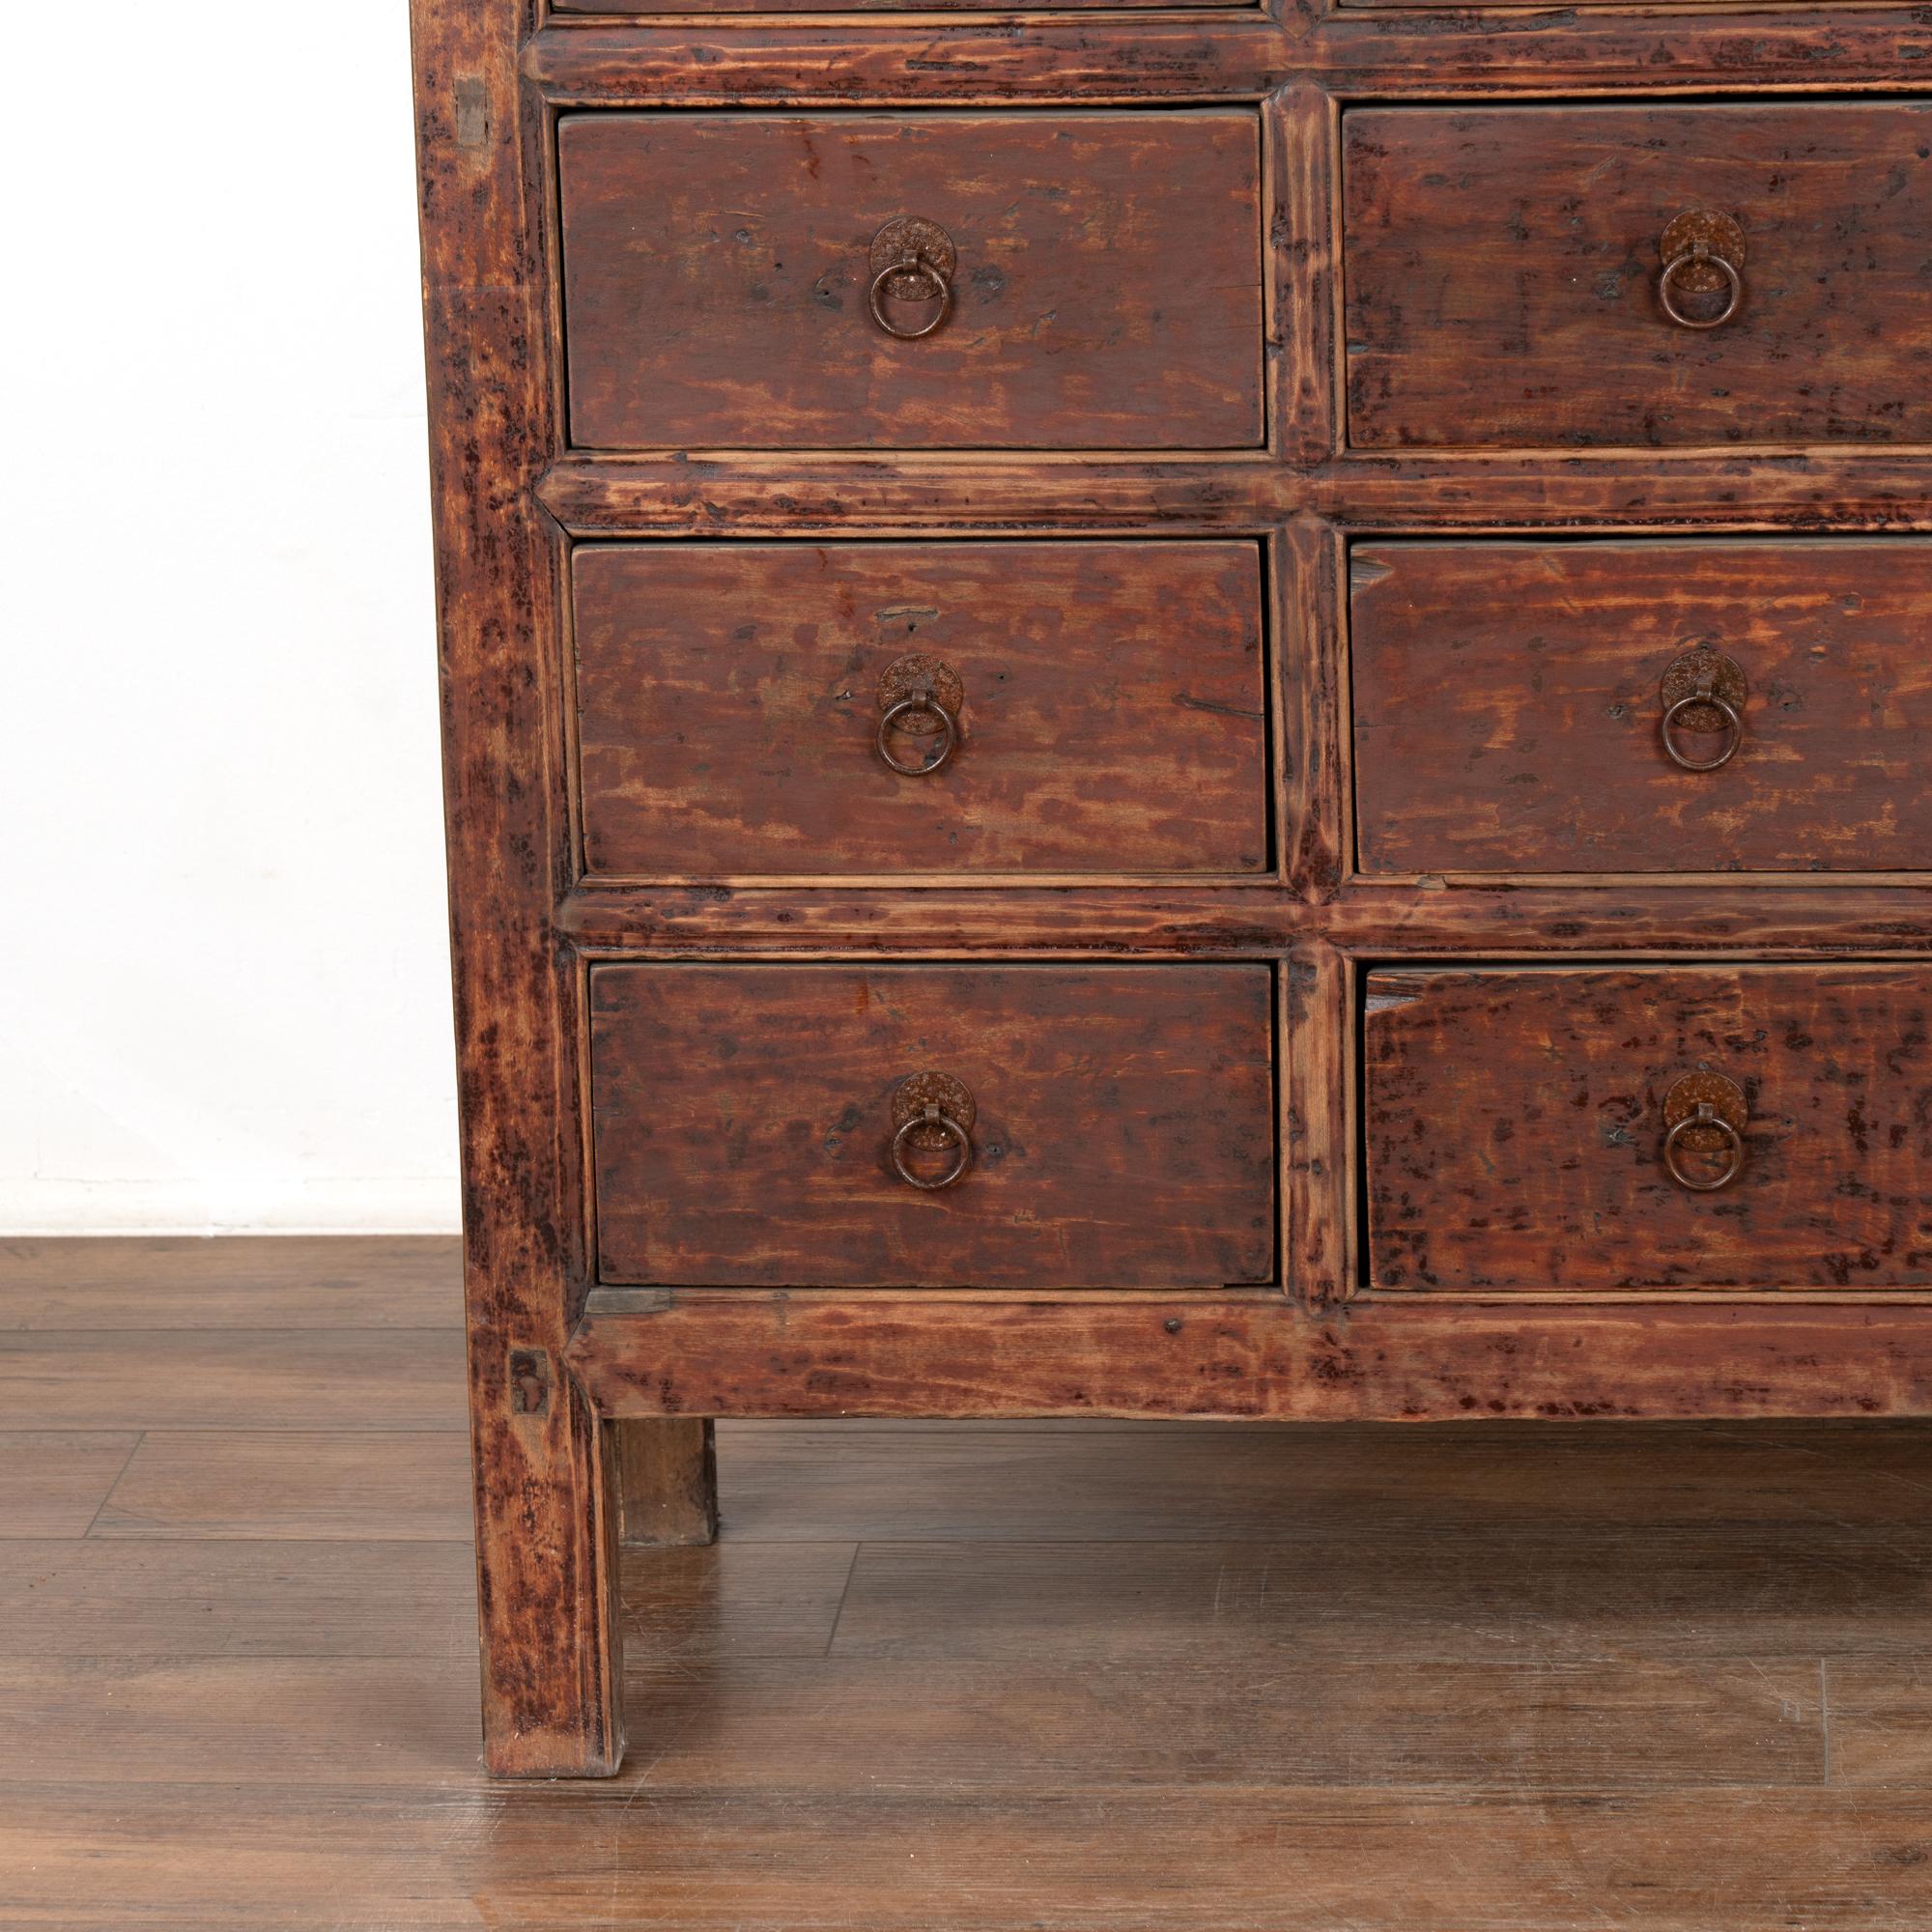 Chinese Apothecary Chest of 24 Drawers, circa 1820-40 For Sale 1